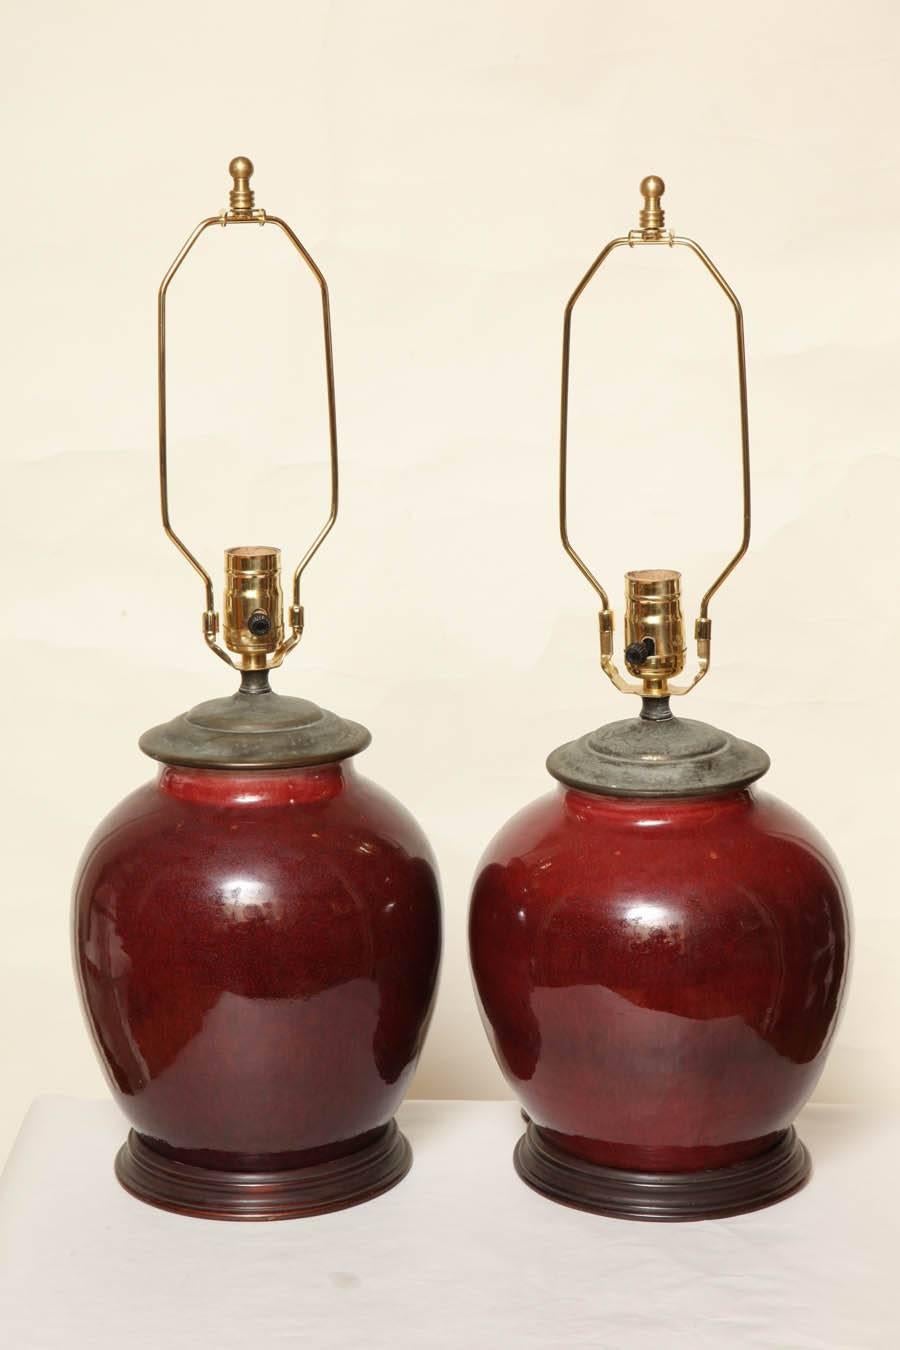 Pair of Chinese globular shape porcelain vases, oxblood glaze, mounted as single-light table lamps. Turned wooden bases and metal vase camps. Vase Height 10 Inches.